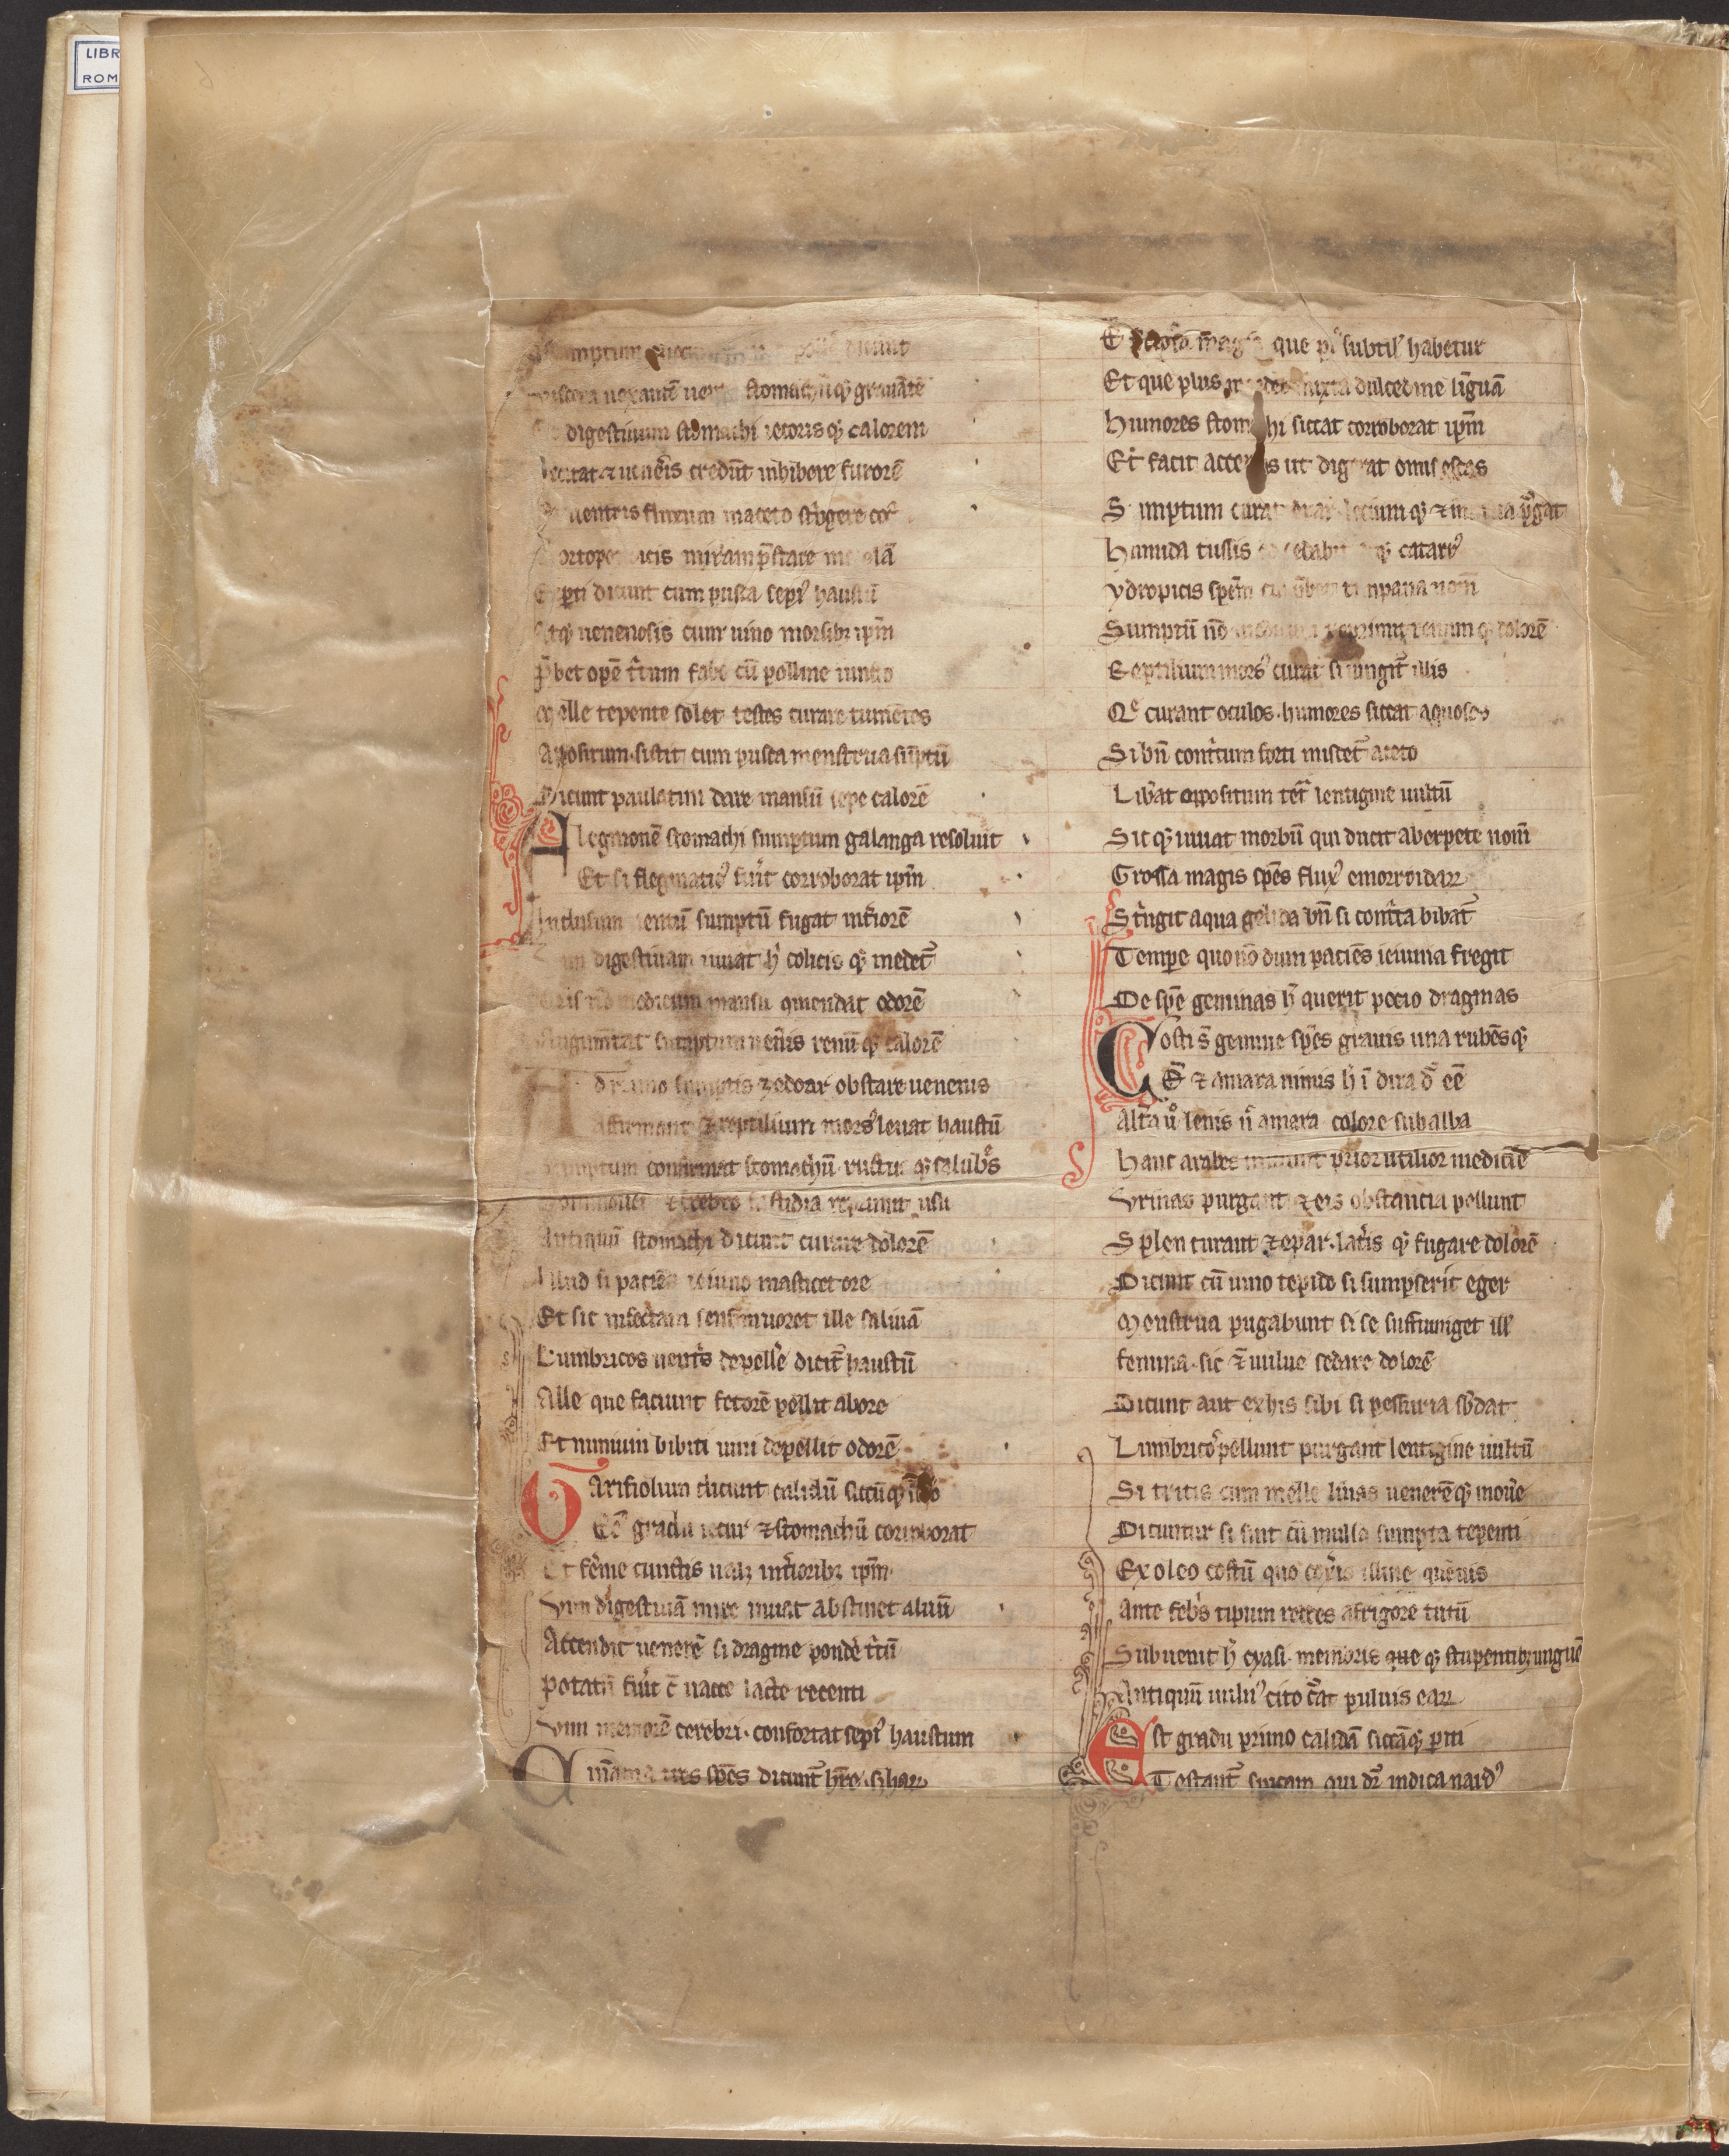 A section of the medieval herbal manuscript on 2 damaged leaves | The